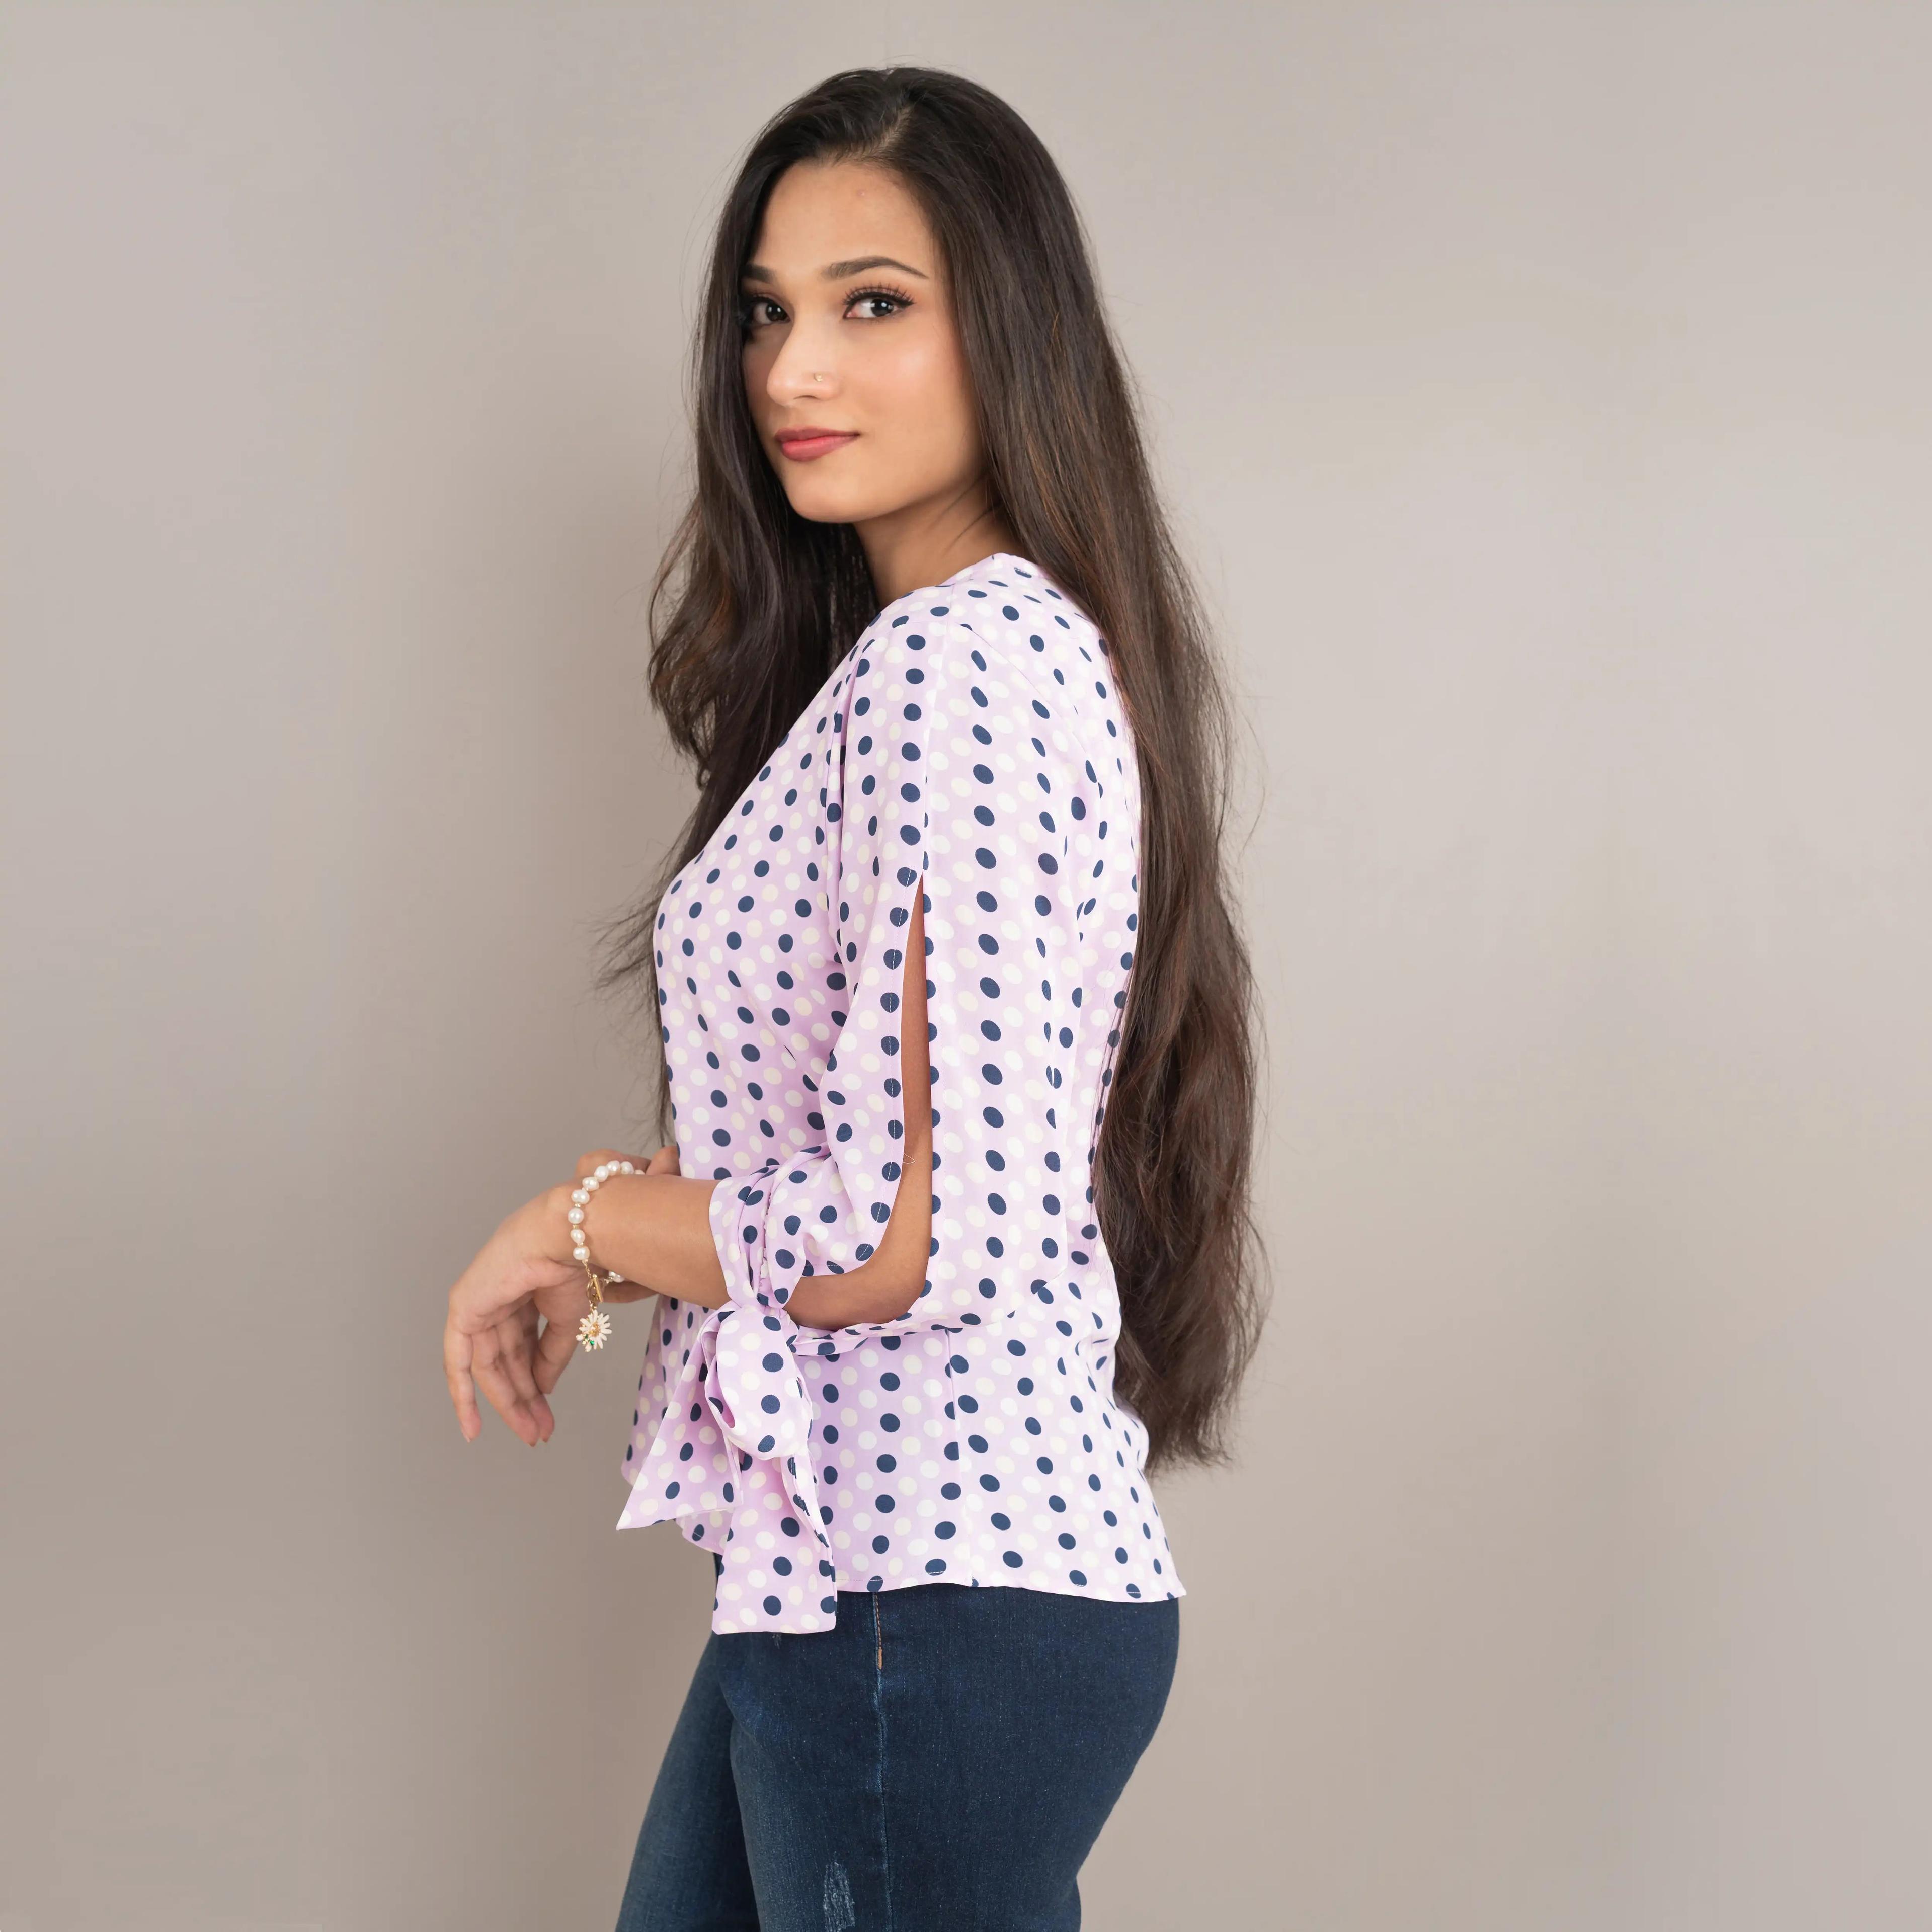 Polka Dot Sleeve Split with Tie Blouse (Lavender with Dot Printed)